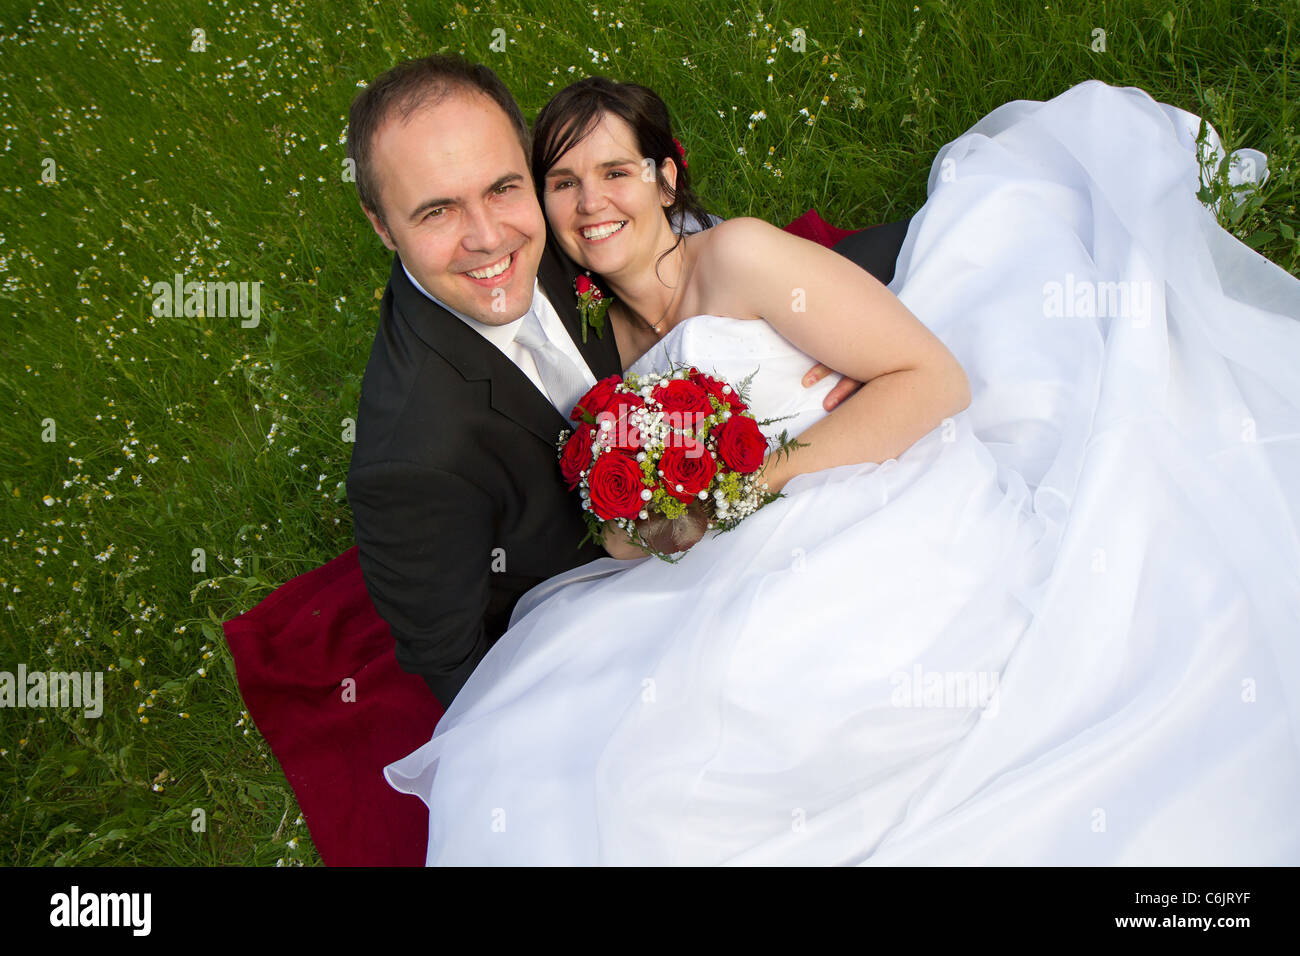 classical newly wed couple with wedding gown dark suit and red bridal bouquet the groom and bride lie on a meadow Stock Photo